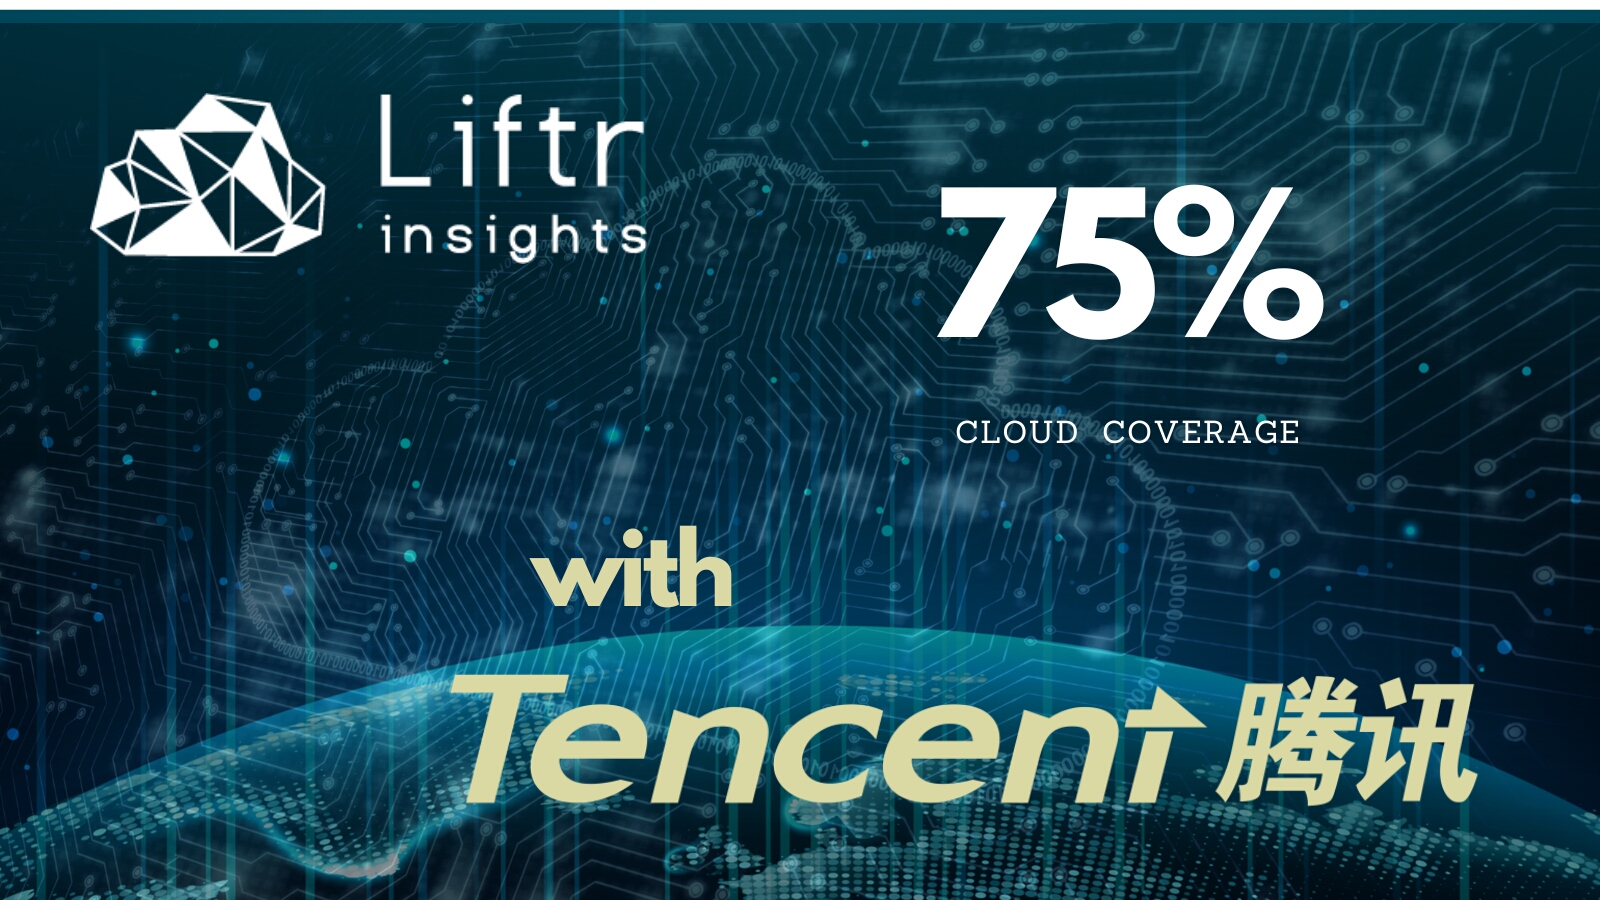 Tencent Cloud Shows Important Signals | Added to Liftr Insights Data